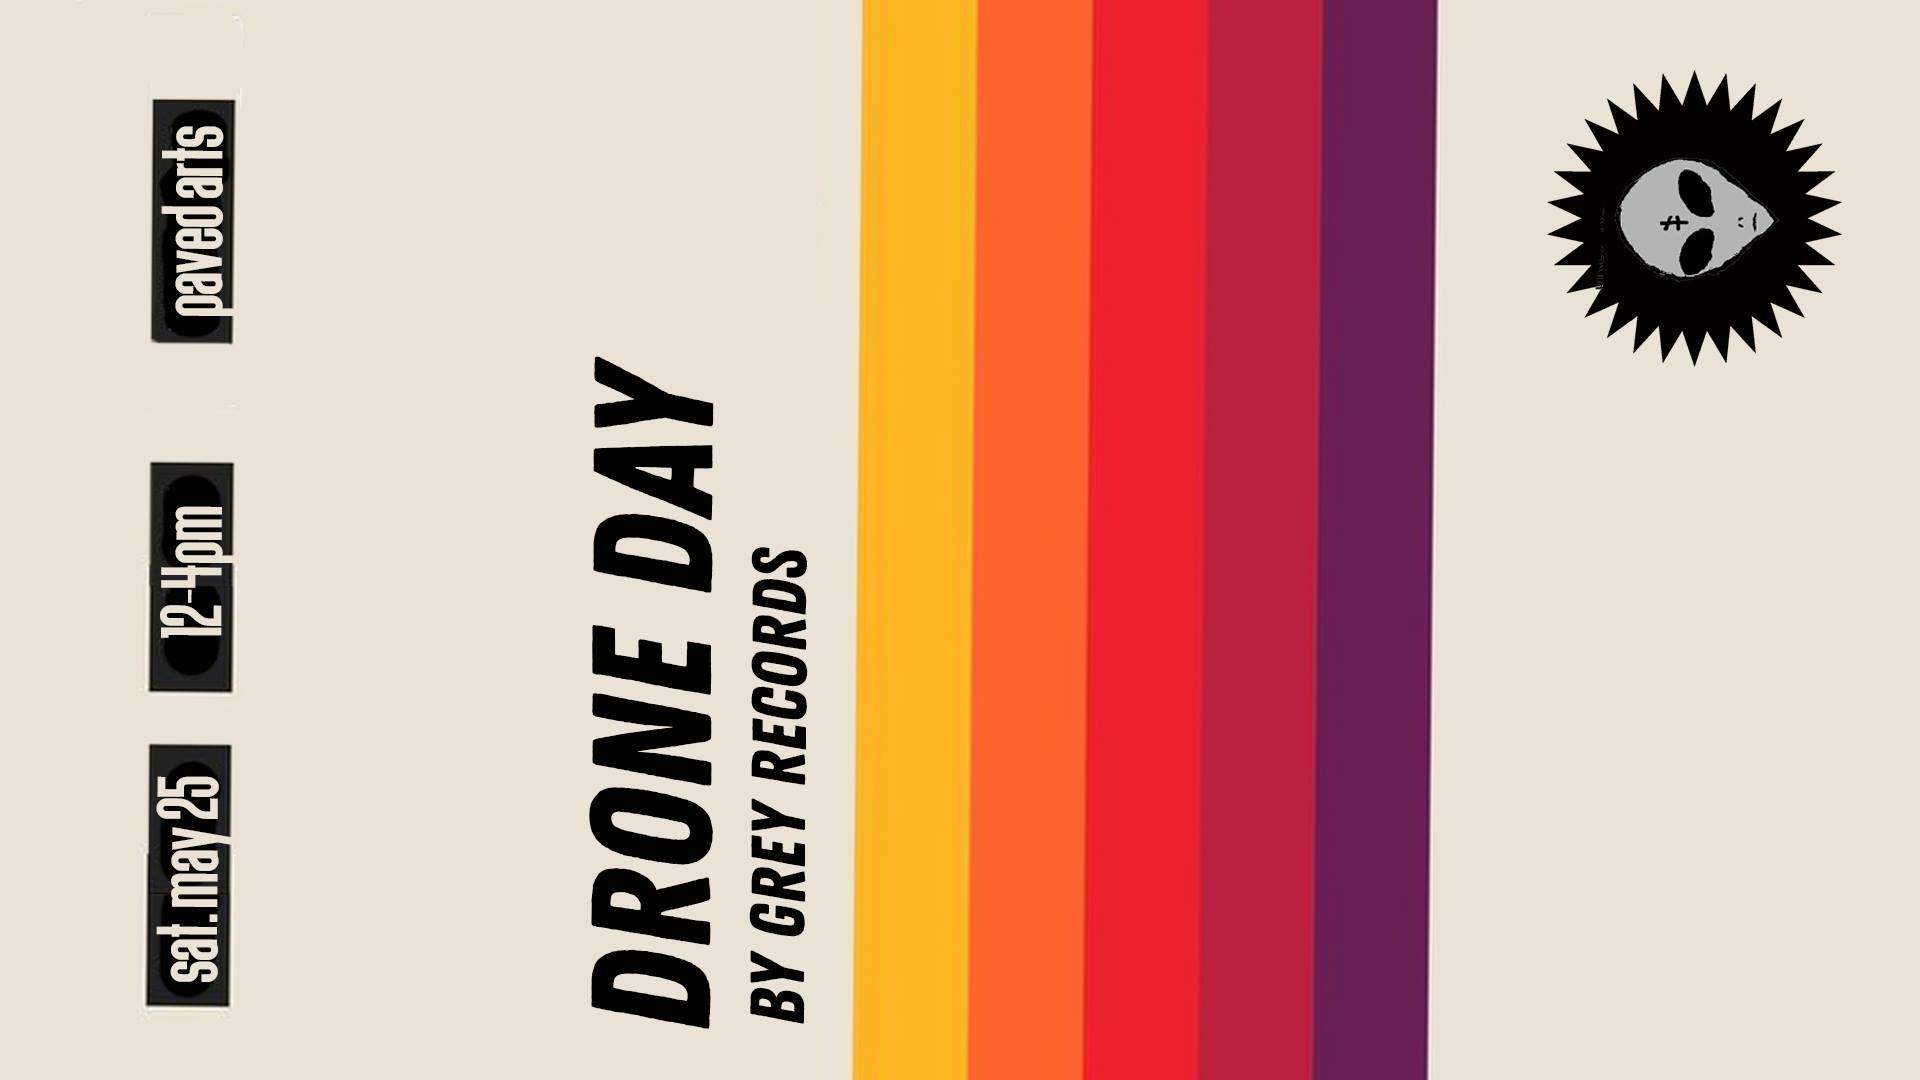 Grey Records poster with lines of color in the sequence of yellow, orange, red, maroon then purple